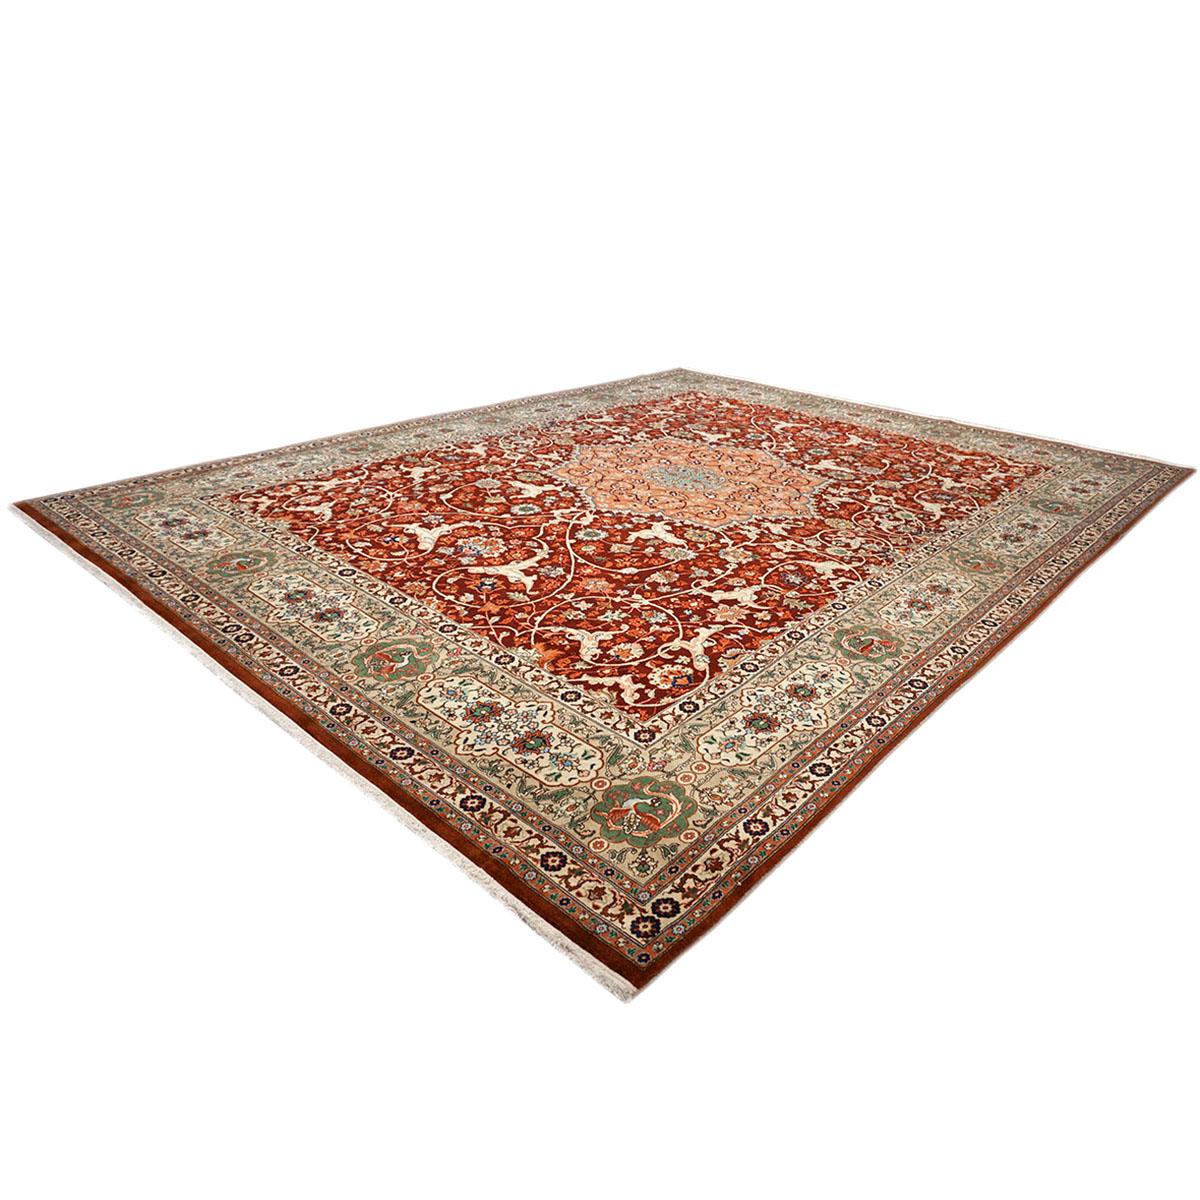 9x12 red area rugs